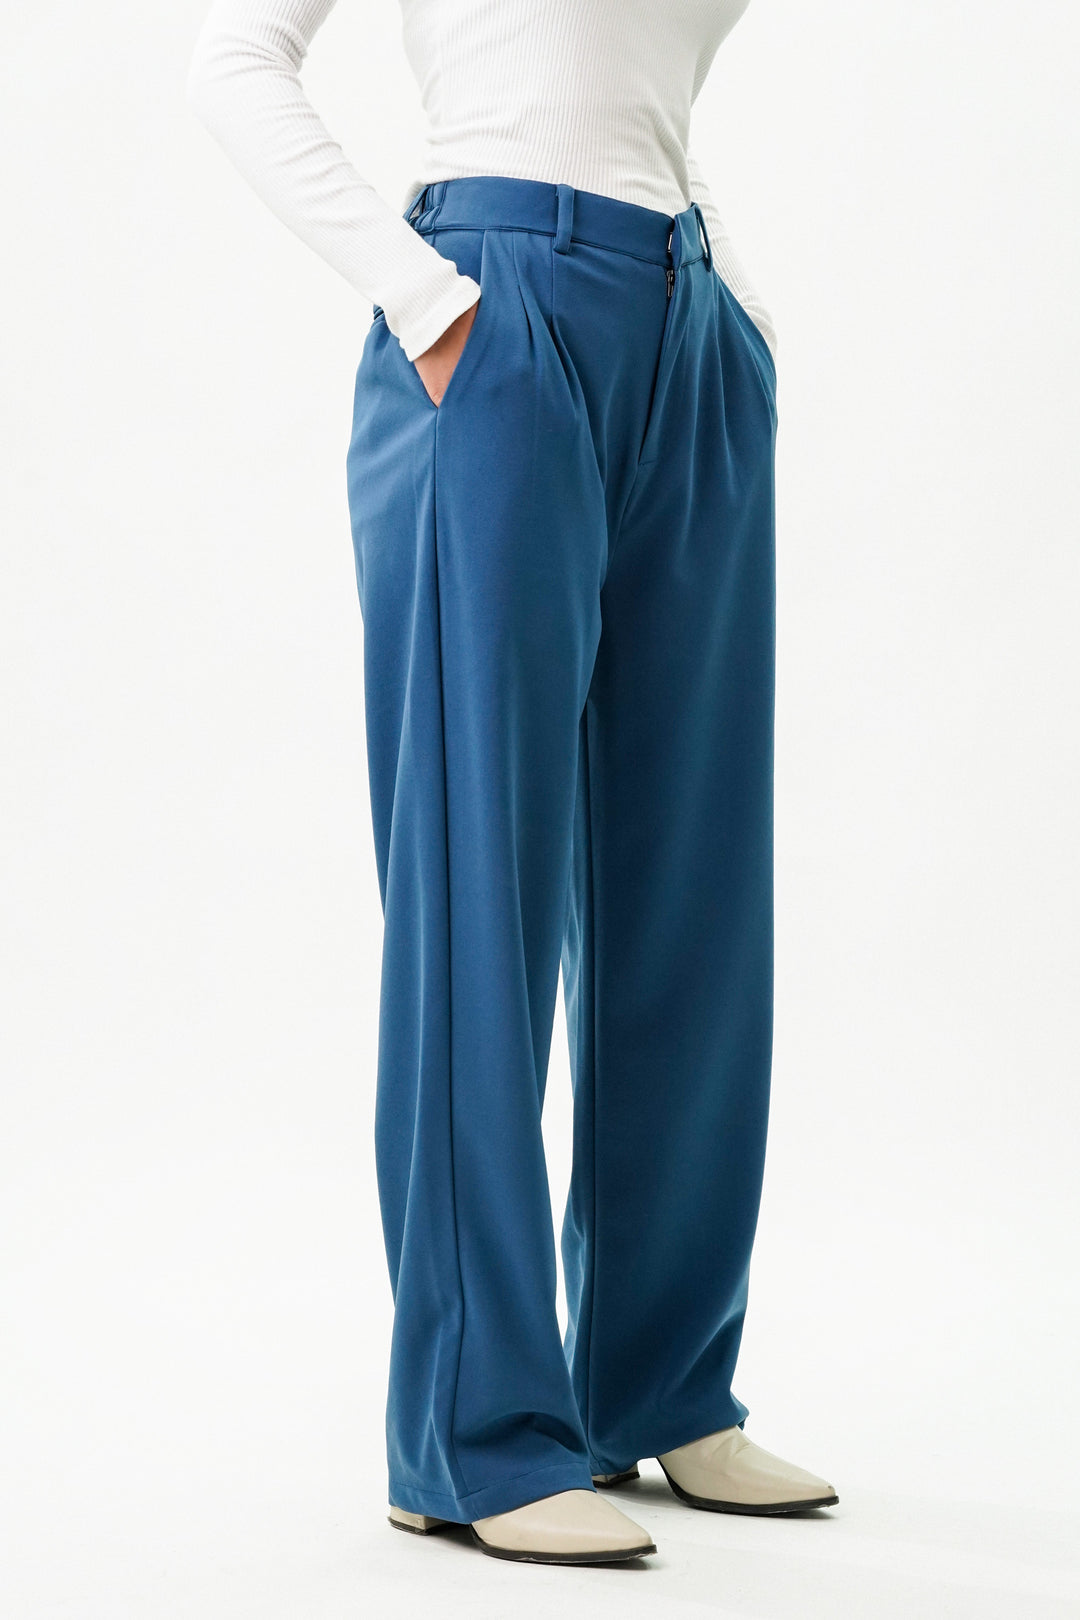 Blue straight fit trousers for office wear